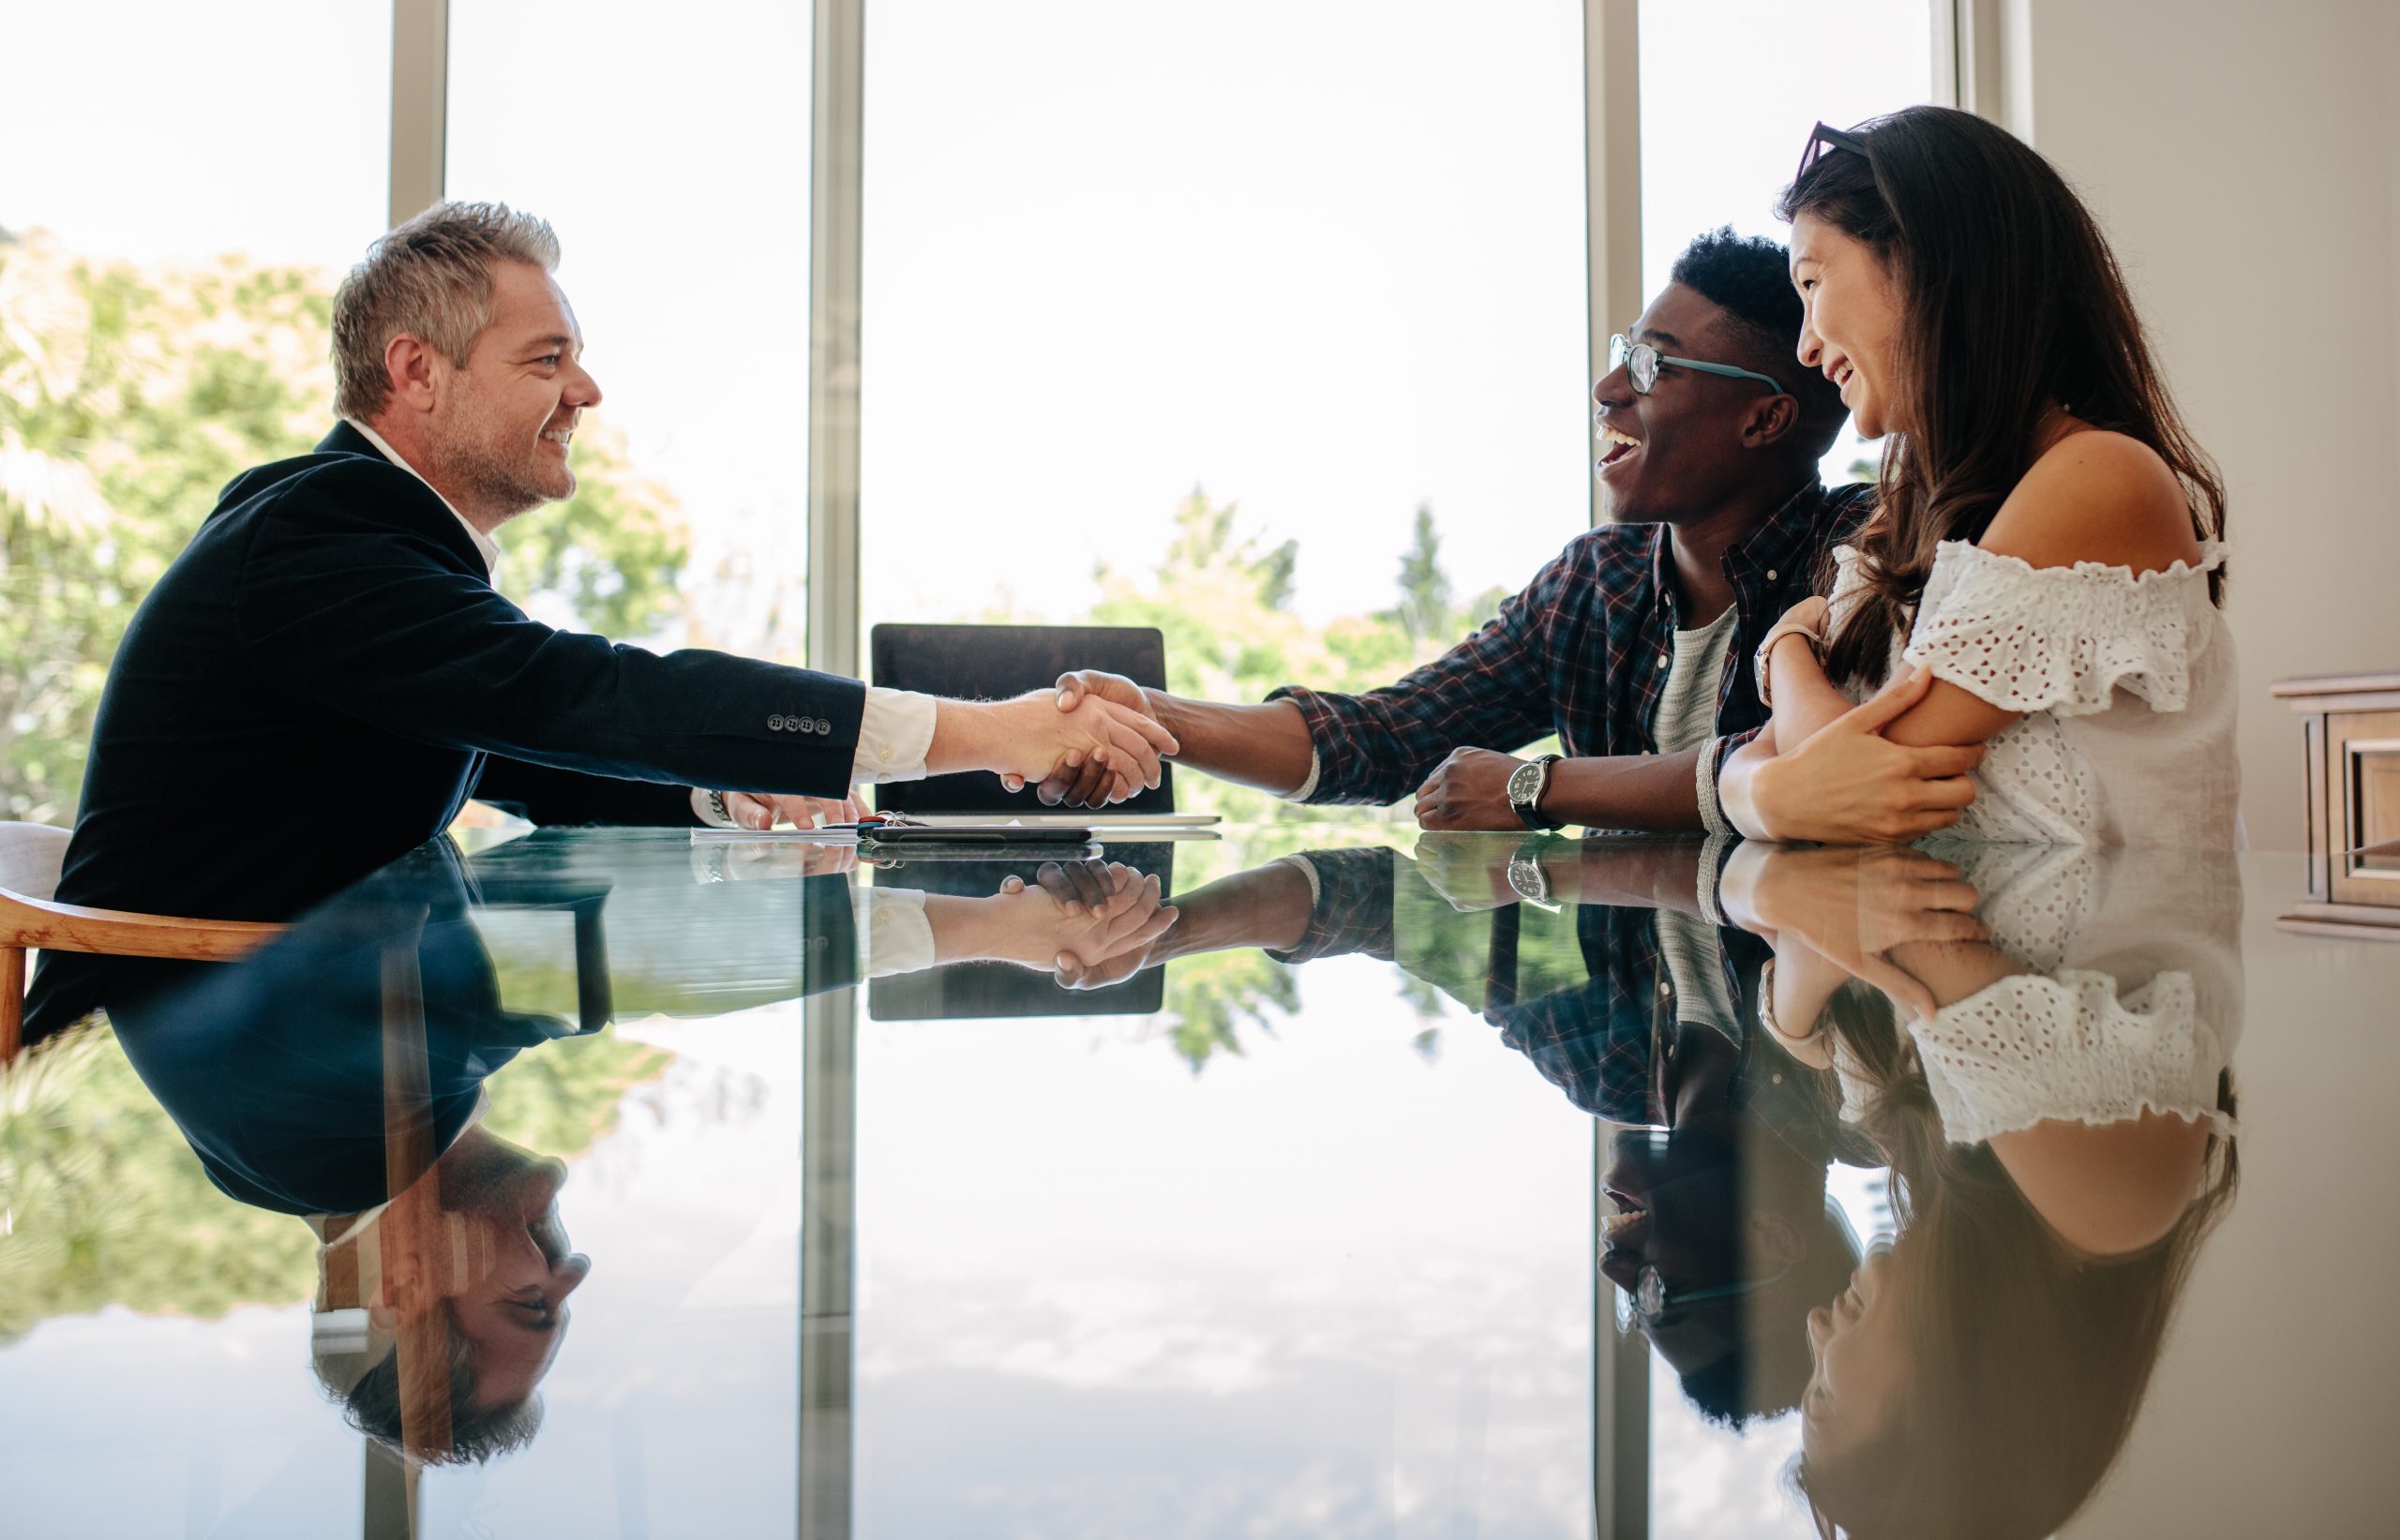 Male real estate broker shaking hands with new property owners while sitting across a table. Property seller congratulating couple on making deal on new house.